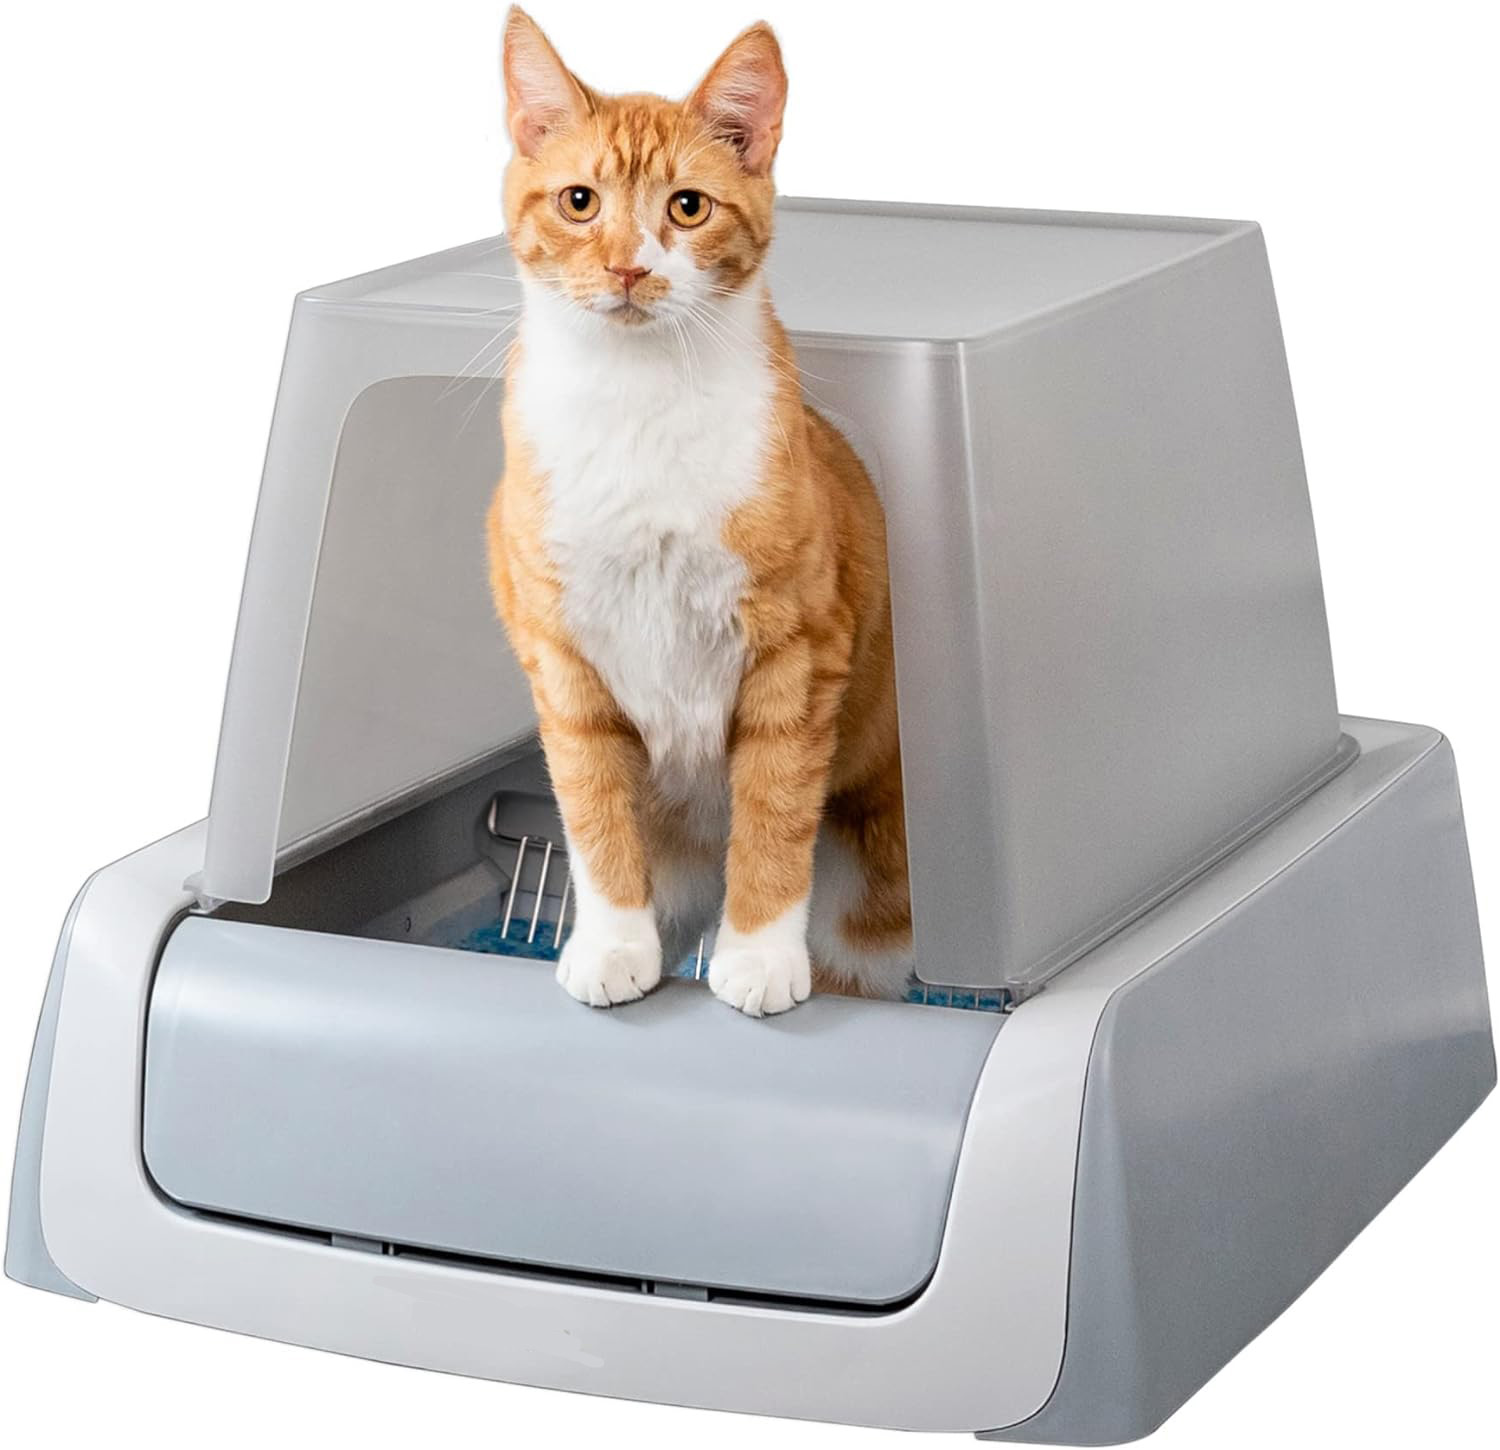 PetSafe ScoopFree Complete Plus Self-Cleaning Cat Litterbox - Hands-No Cleanup With Disposable Crystal Tray - Less Tracking, Better Odor Control - Includes Disposable Tray